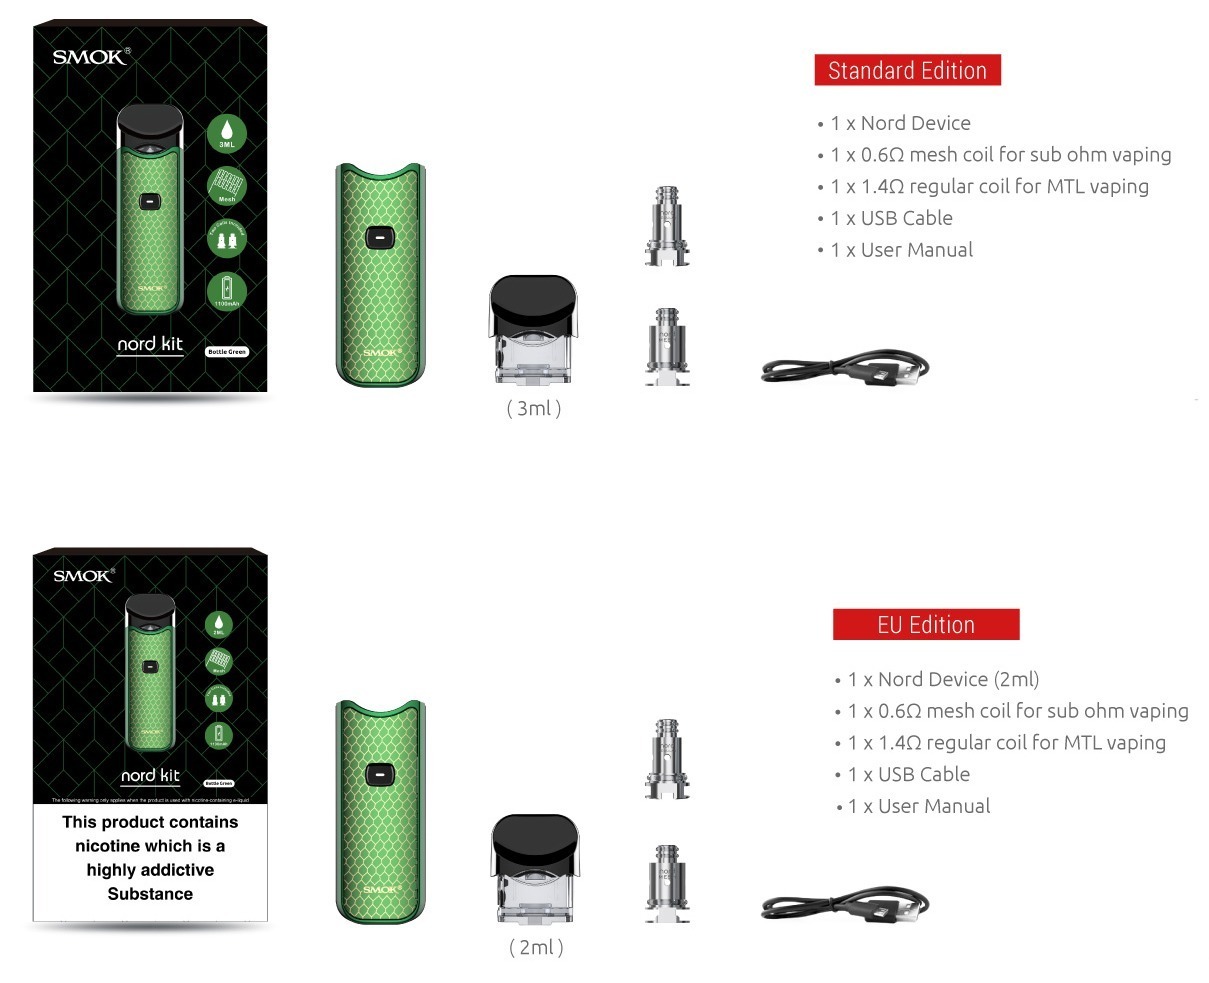 Buy SMOK Nord Kit and enjoy vaping! Find the latest electronic cigarettes from SMOK, VooPoo, Aspire and Joyetech at vape shop!